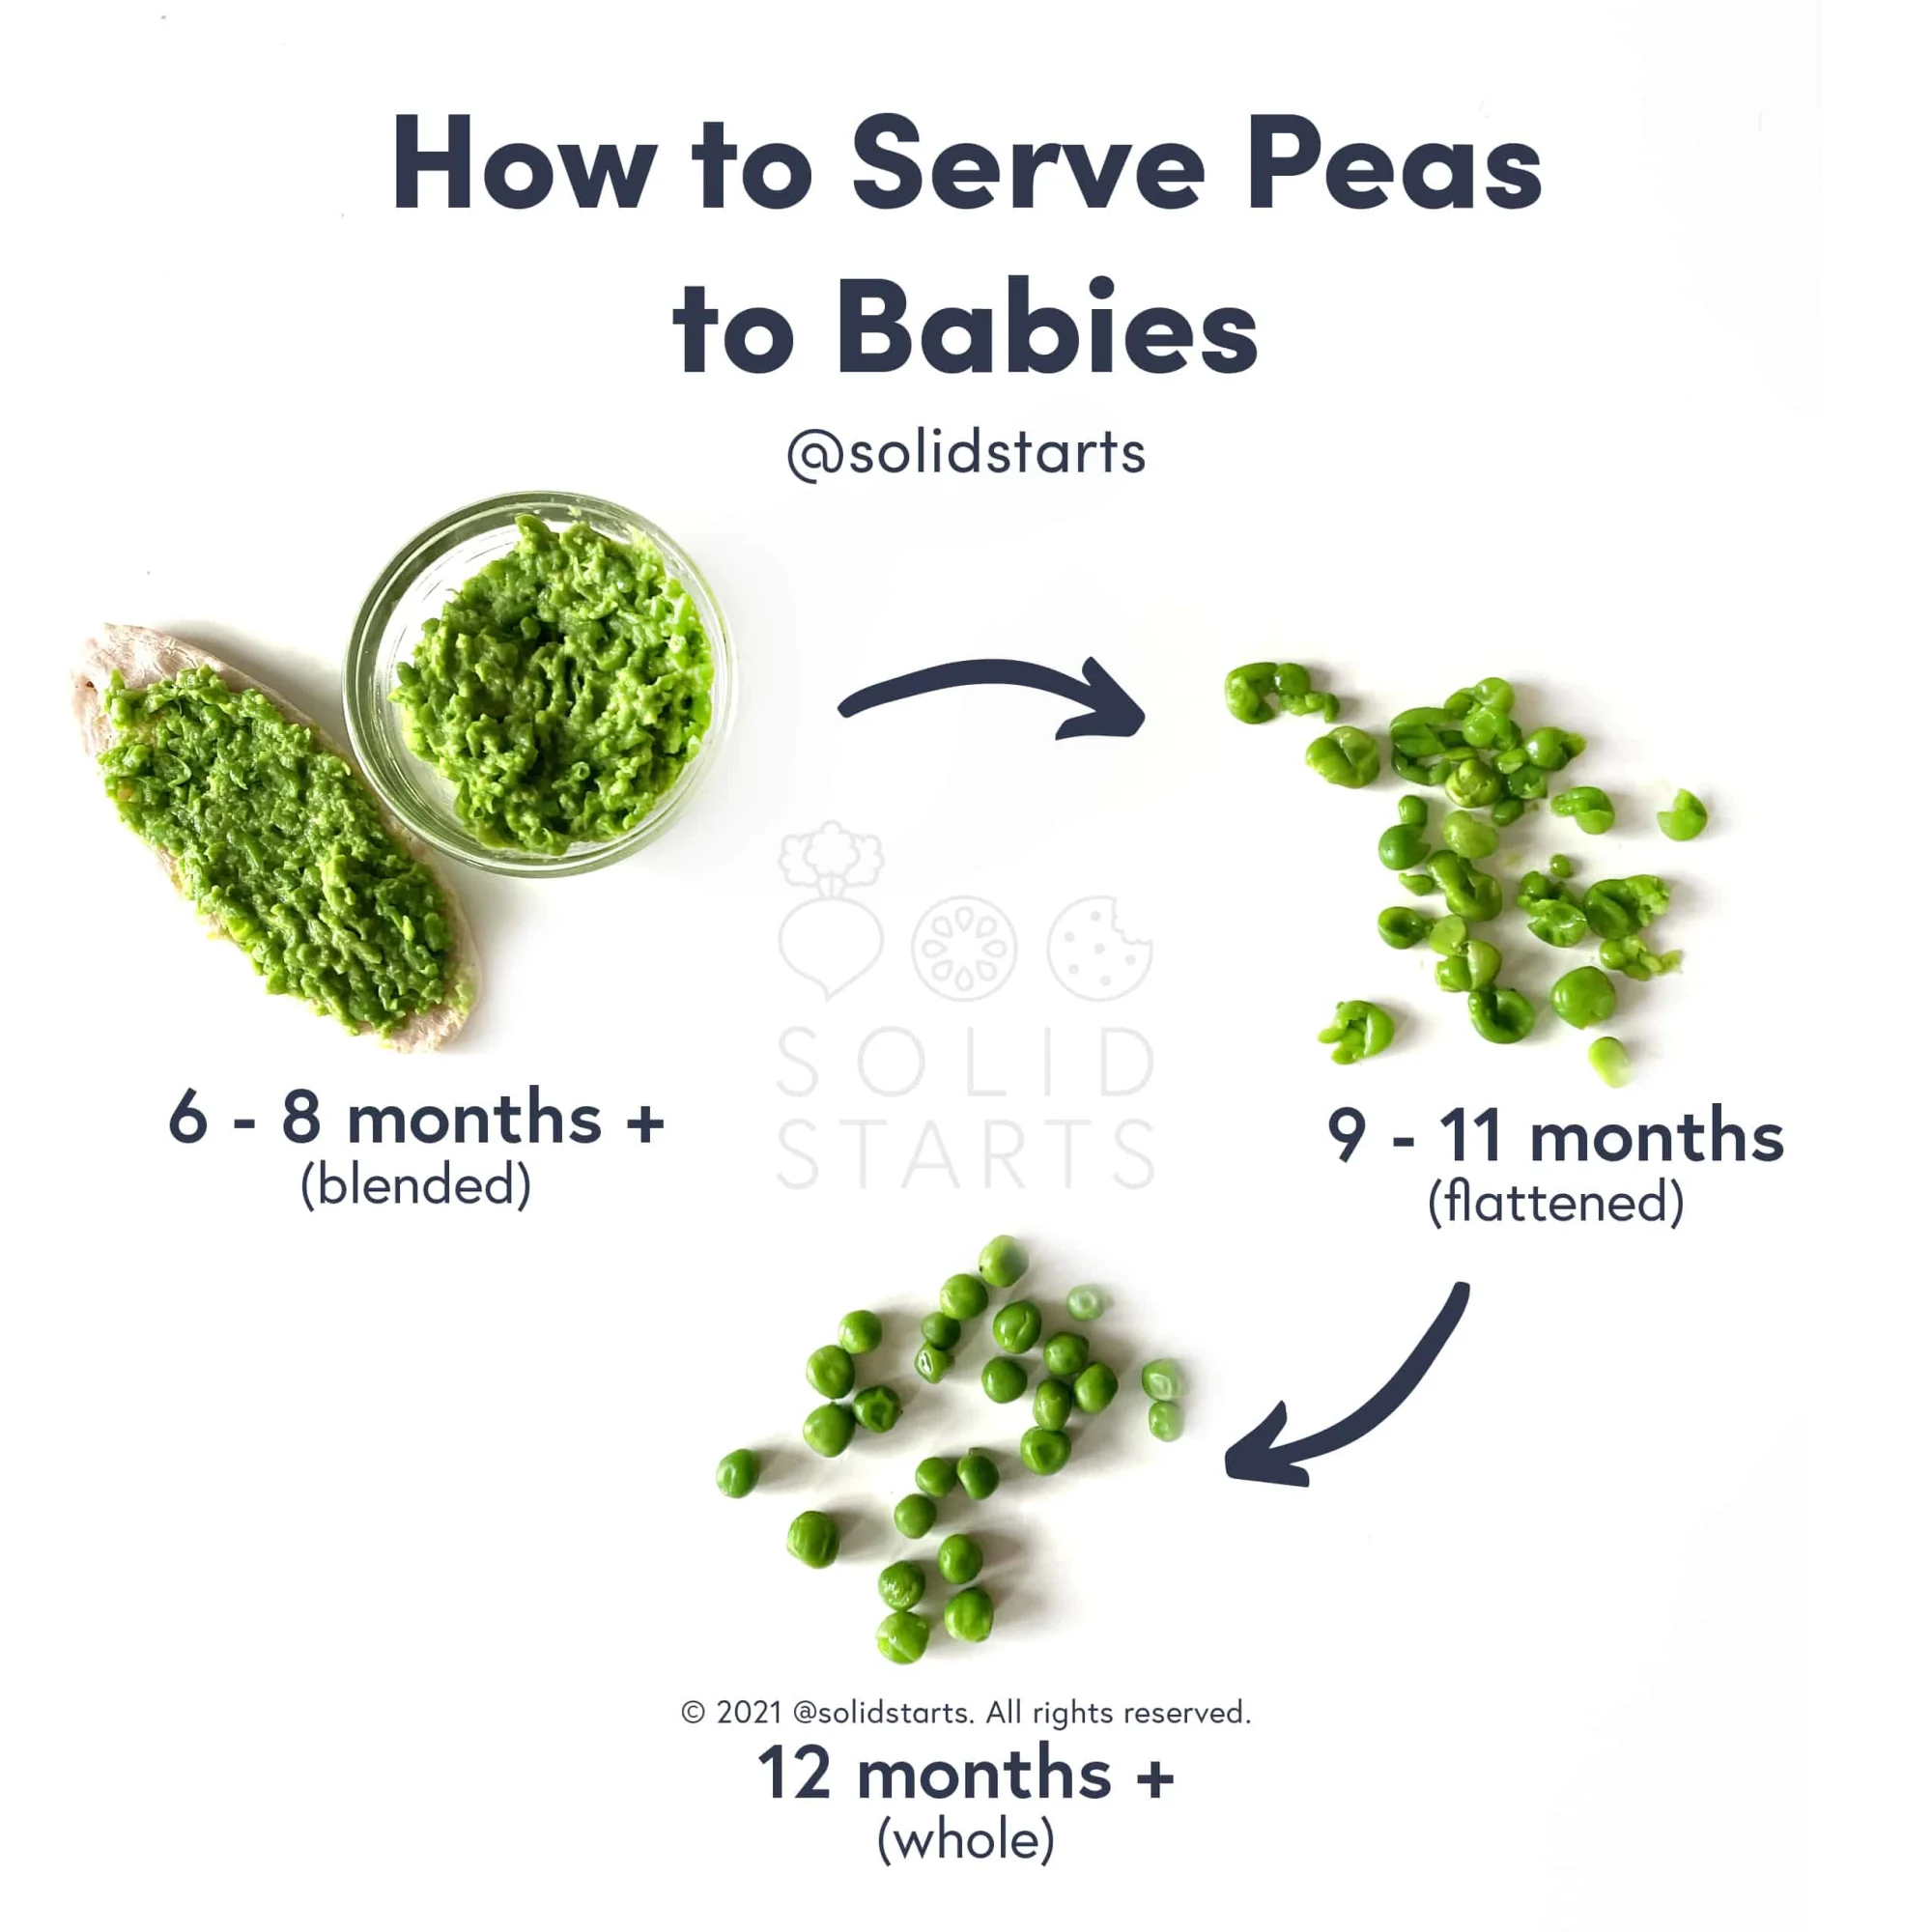 infographic showing how to offer peas to babies by age: blended into a mash for babies 6-8 months, flattened whole peas for babies 9-11 months, and whole peas for toddlers 12 months and older